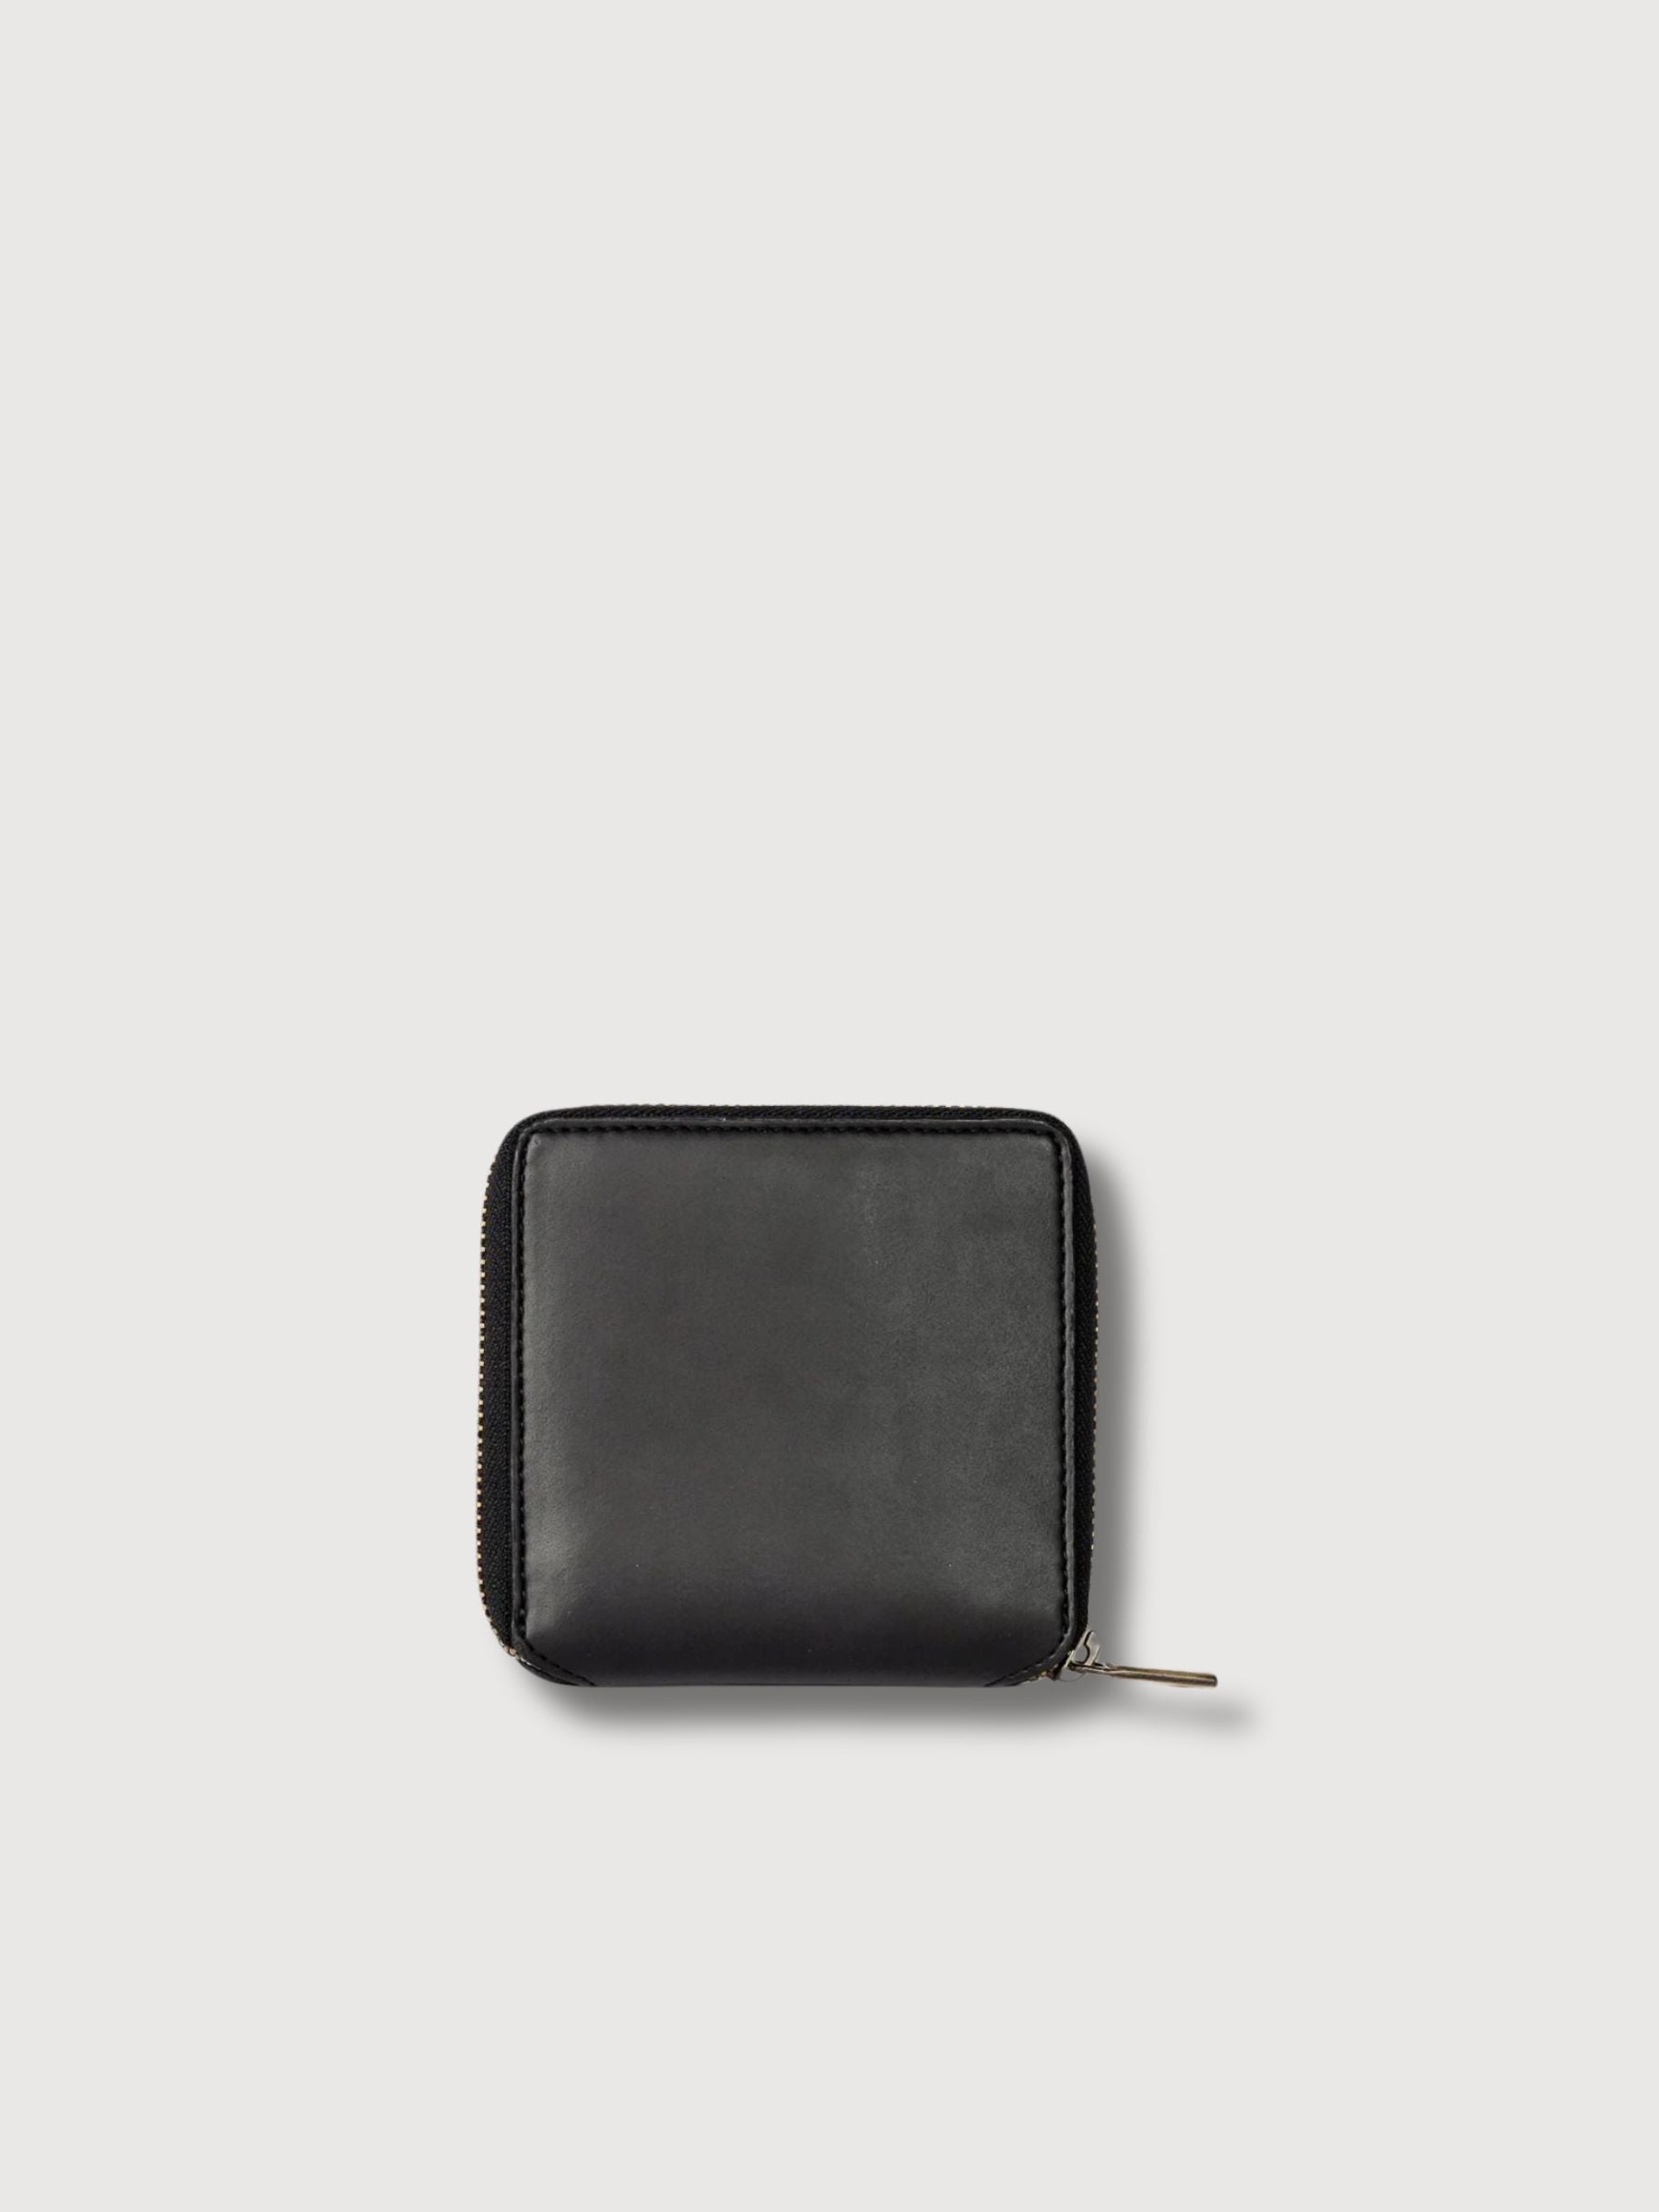 Sonny Square Brieftasche in Apfelhaut | O My Bag